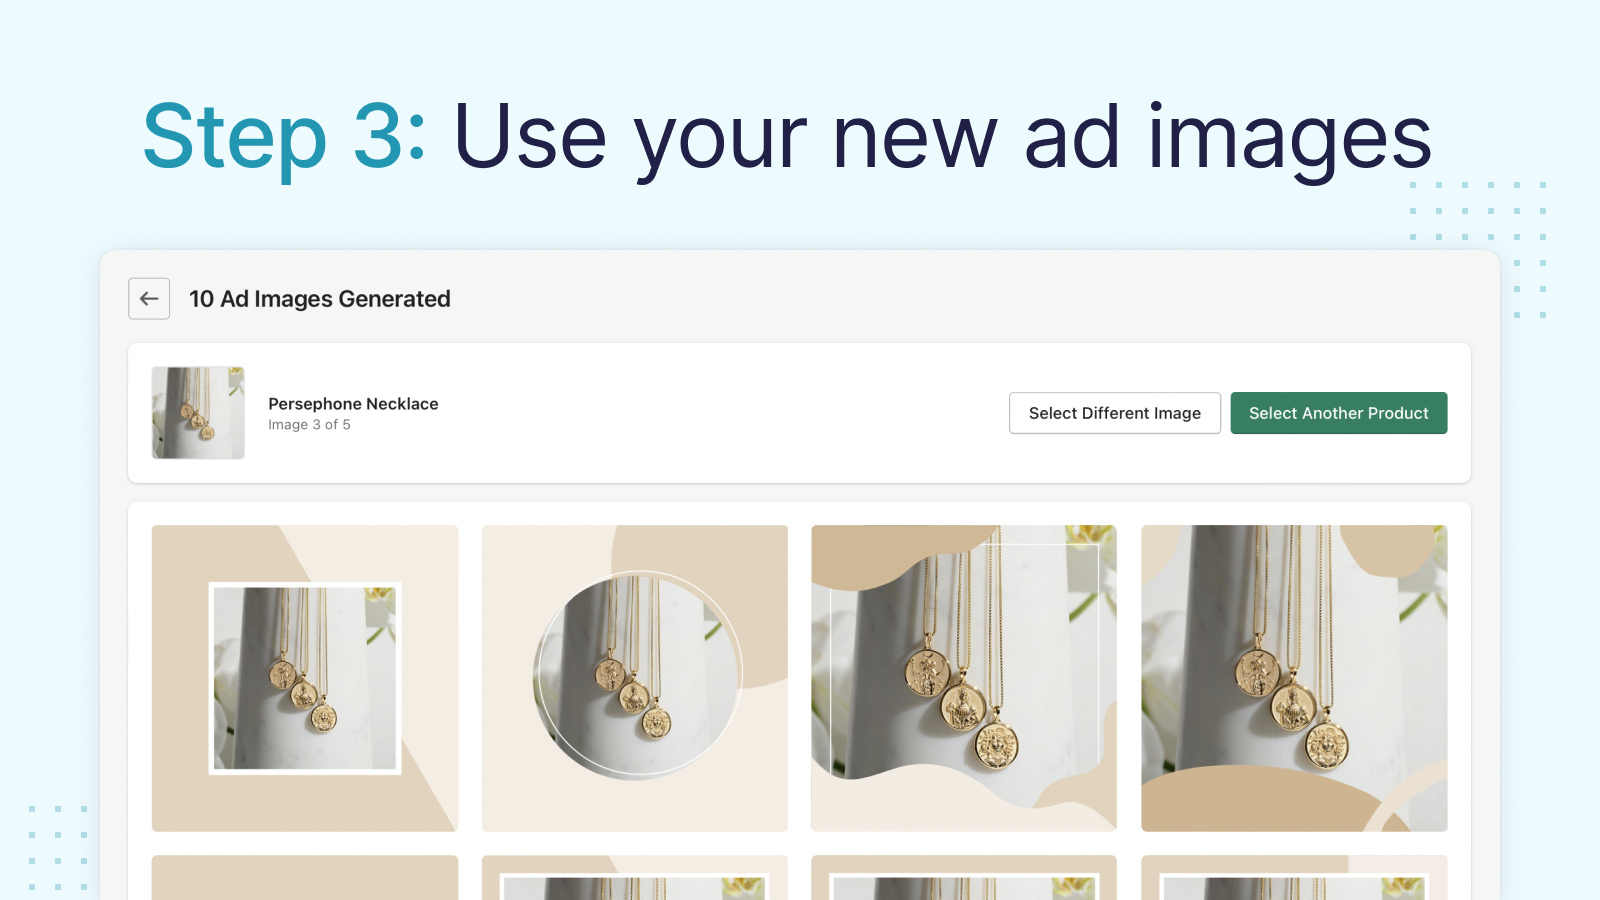 Step 3: Use your favourite generated ad images